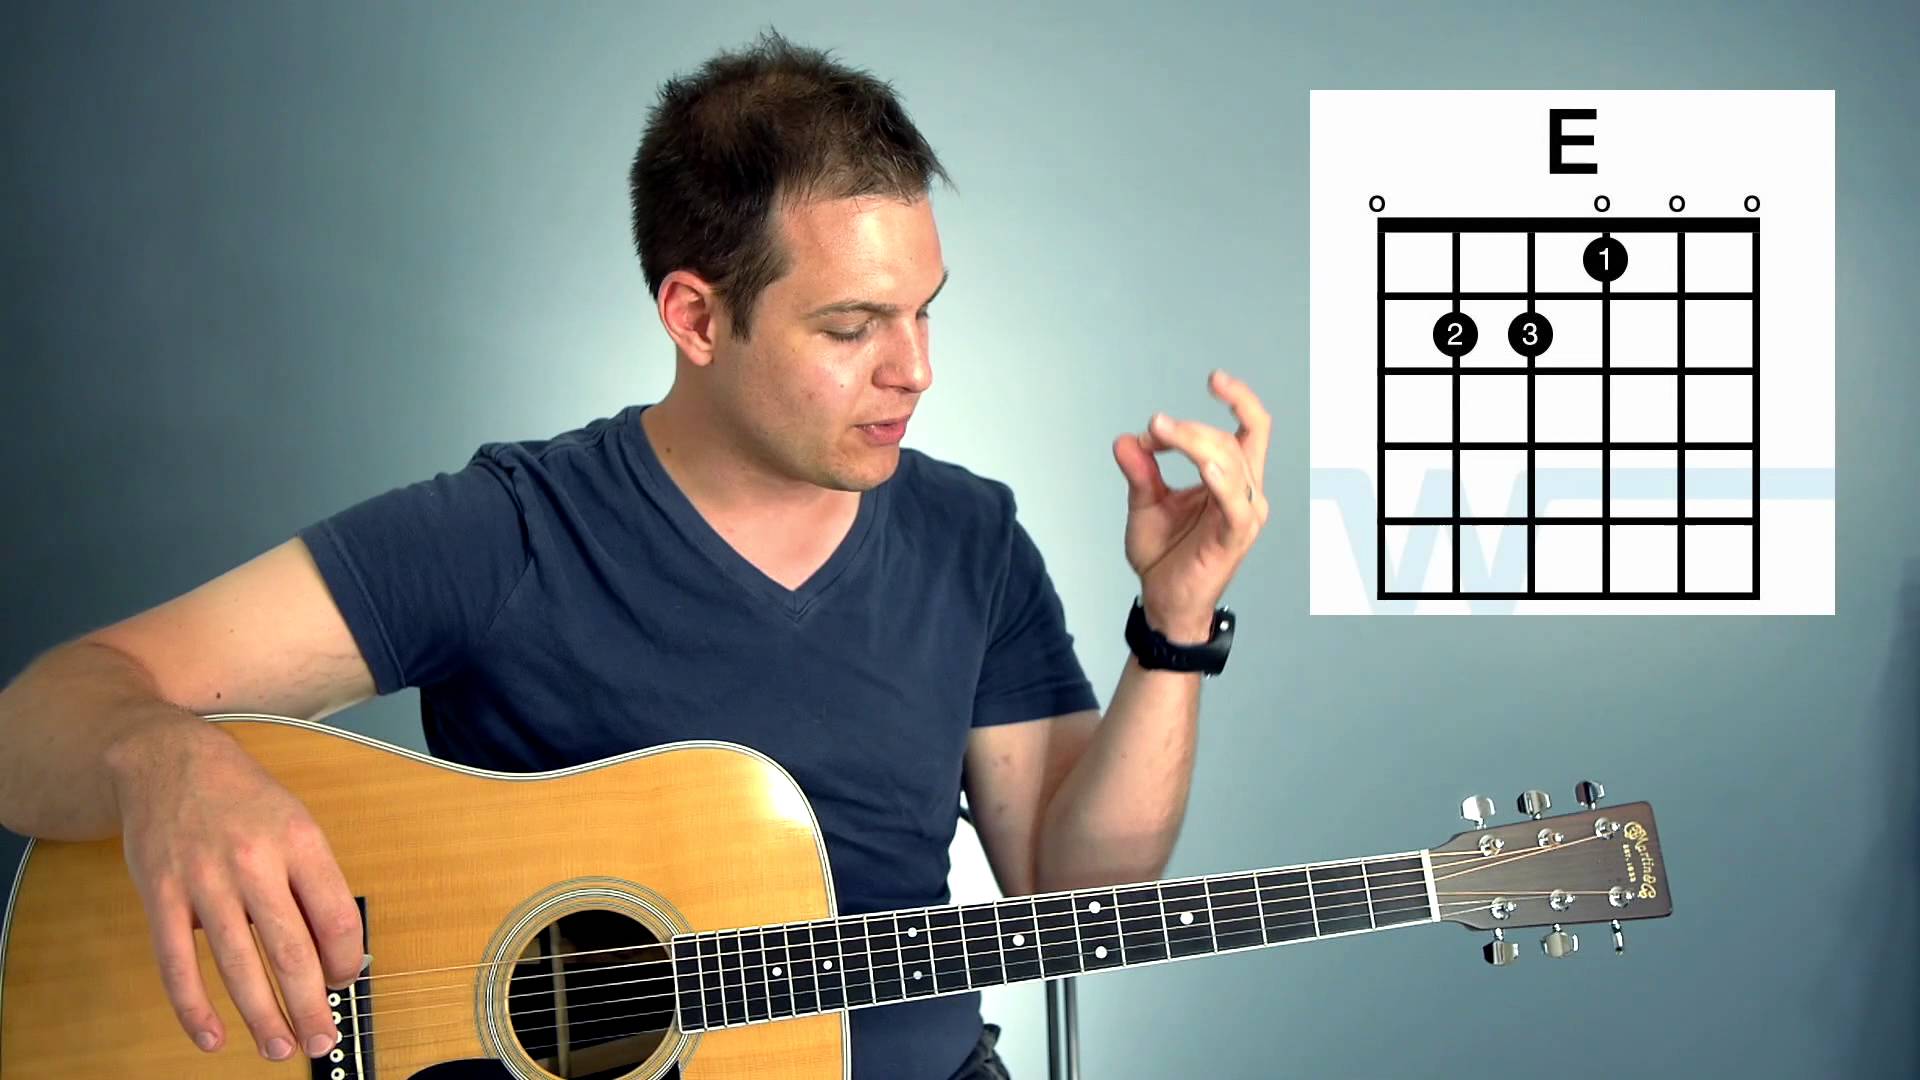 Guitar Lesson – How to play chords in the key of A (A, E, D, F#m)